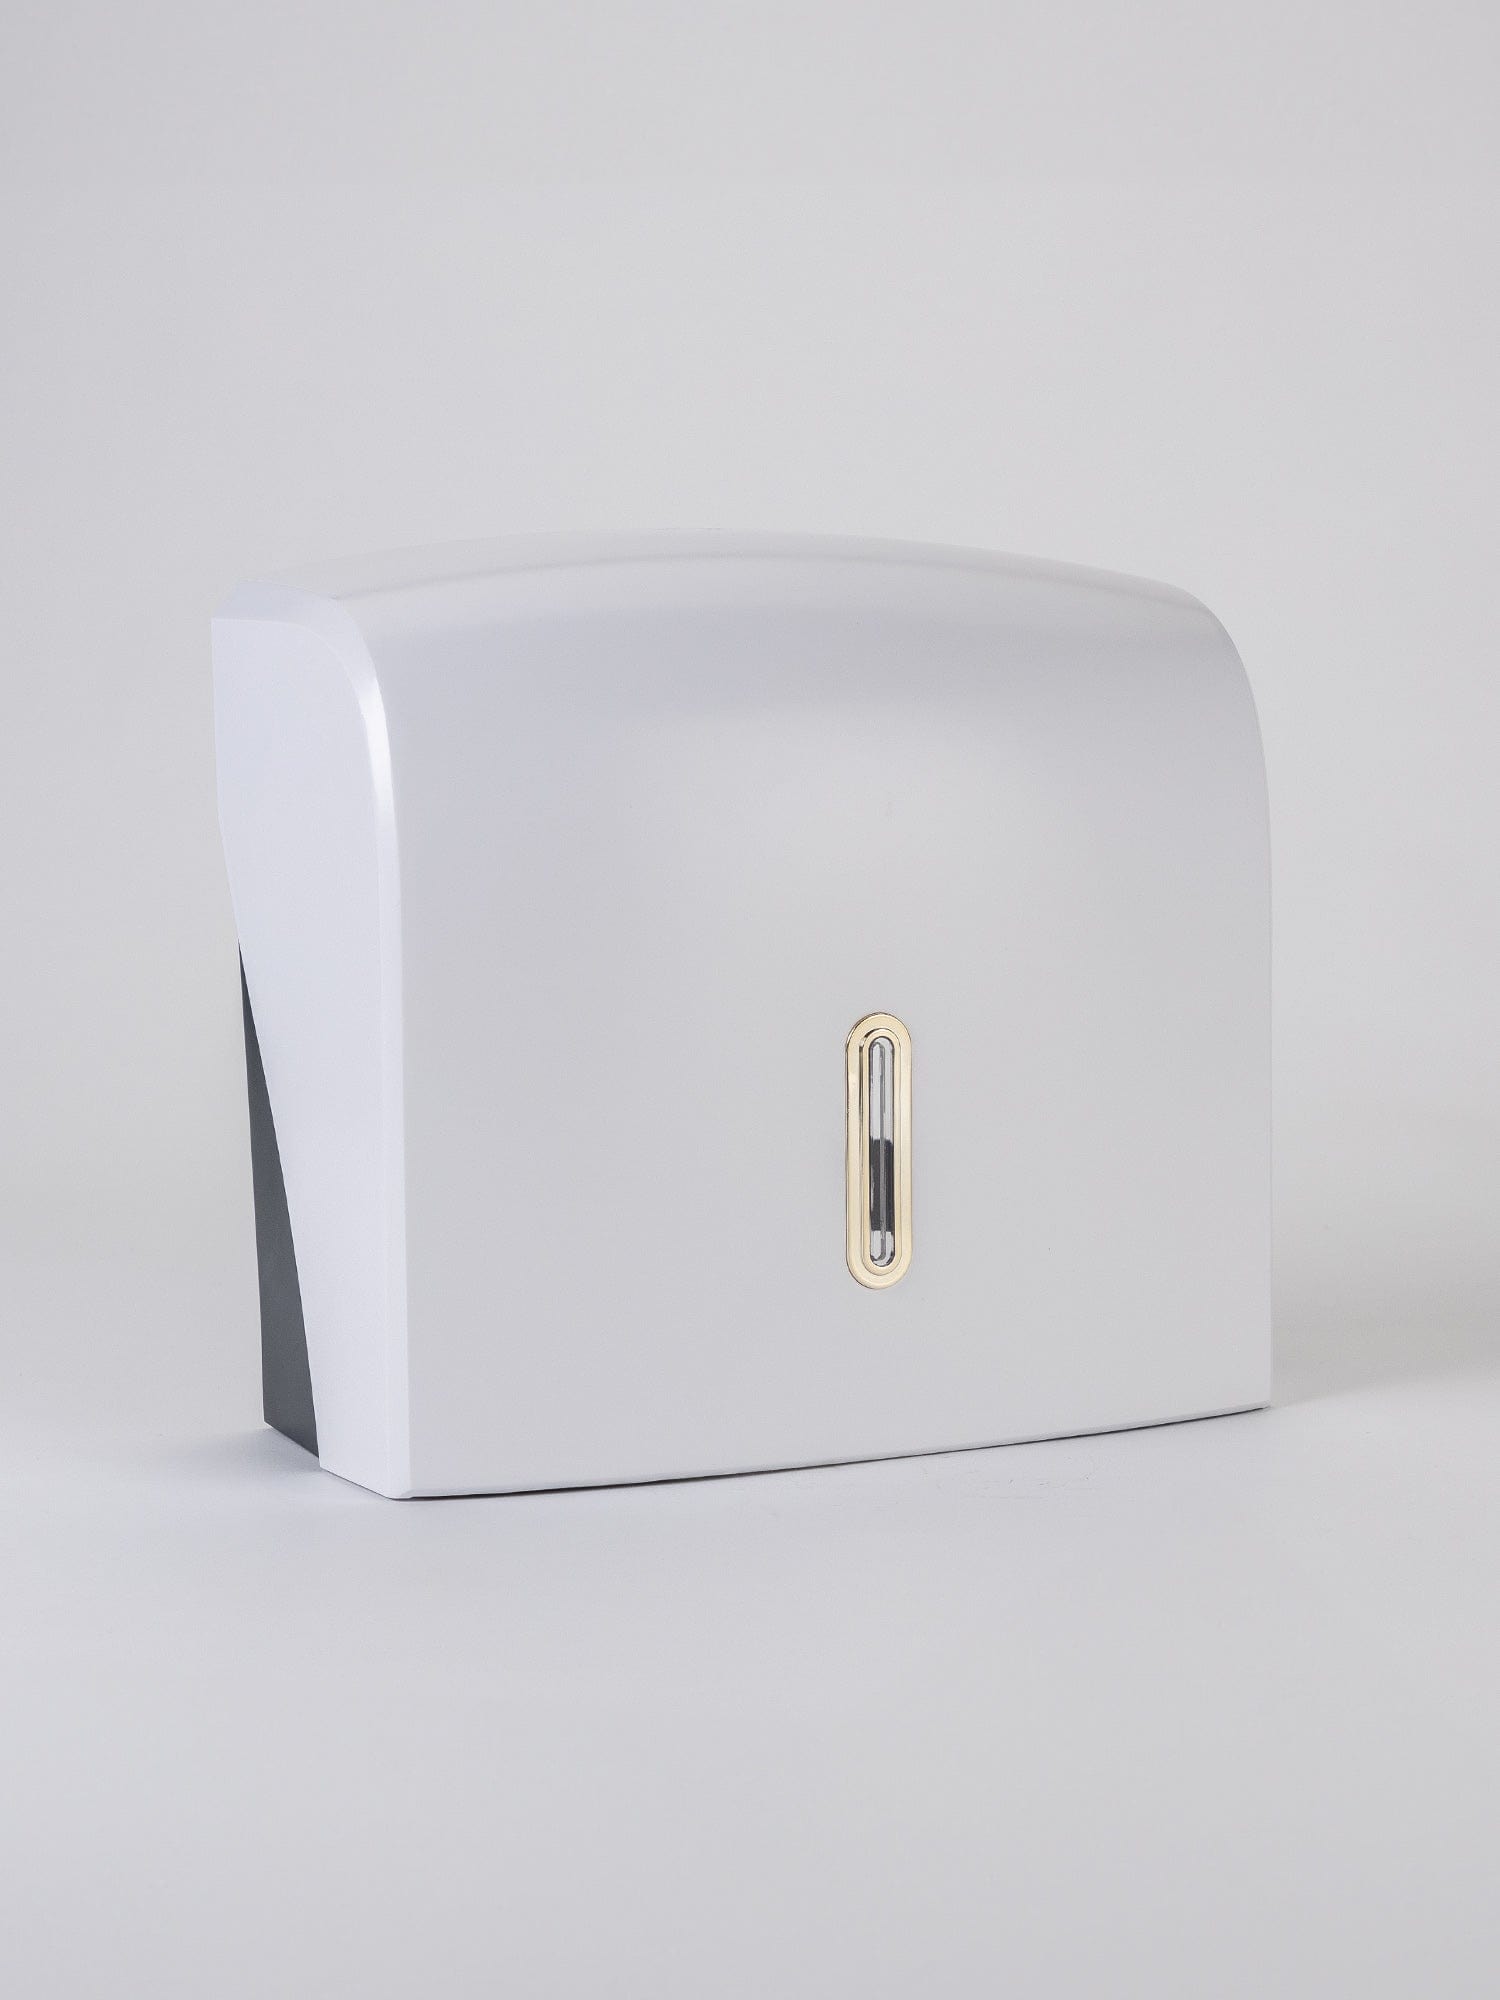 gold halo small hand towel dispensers